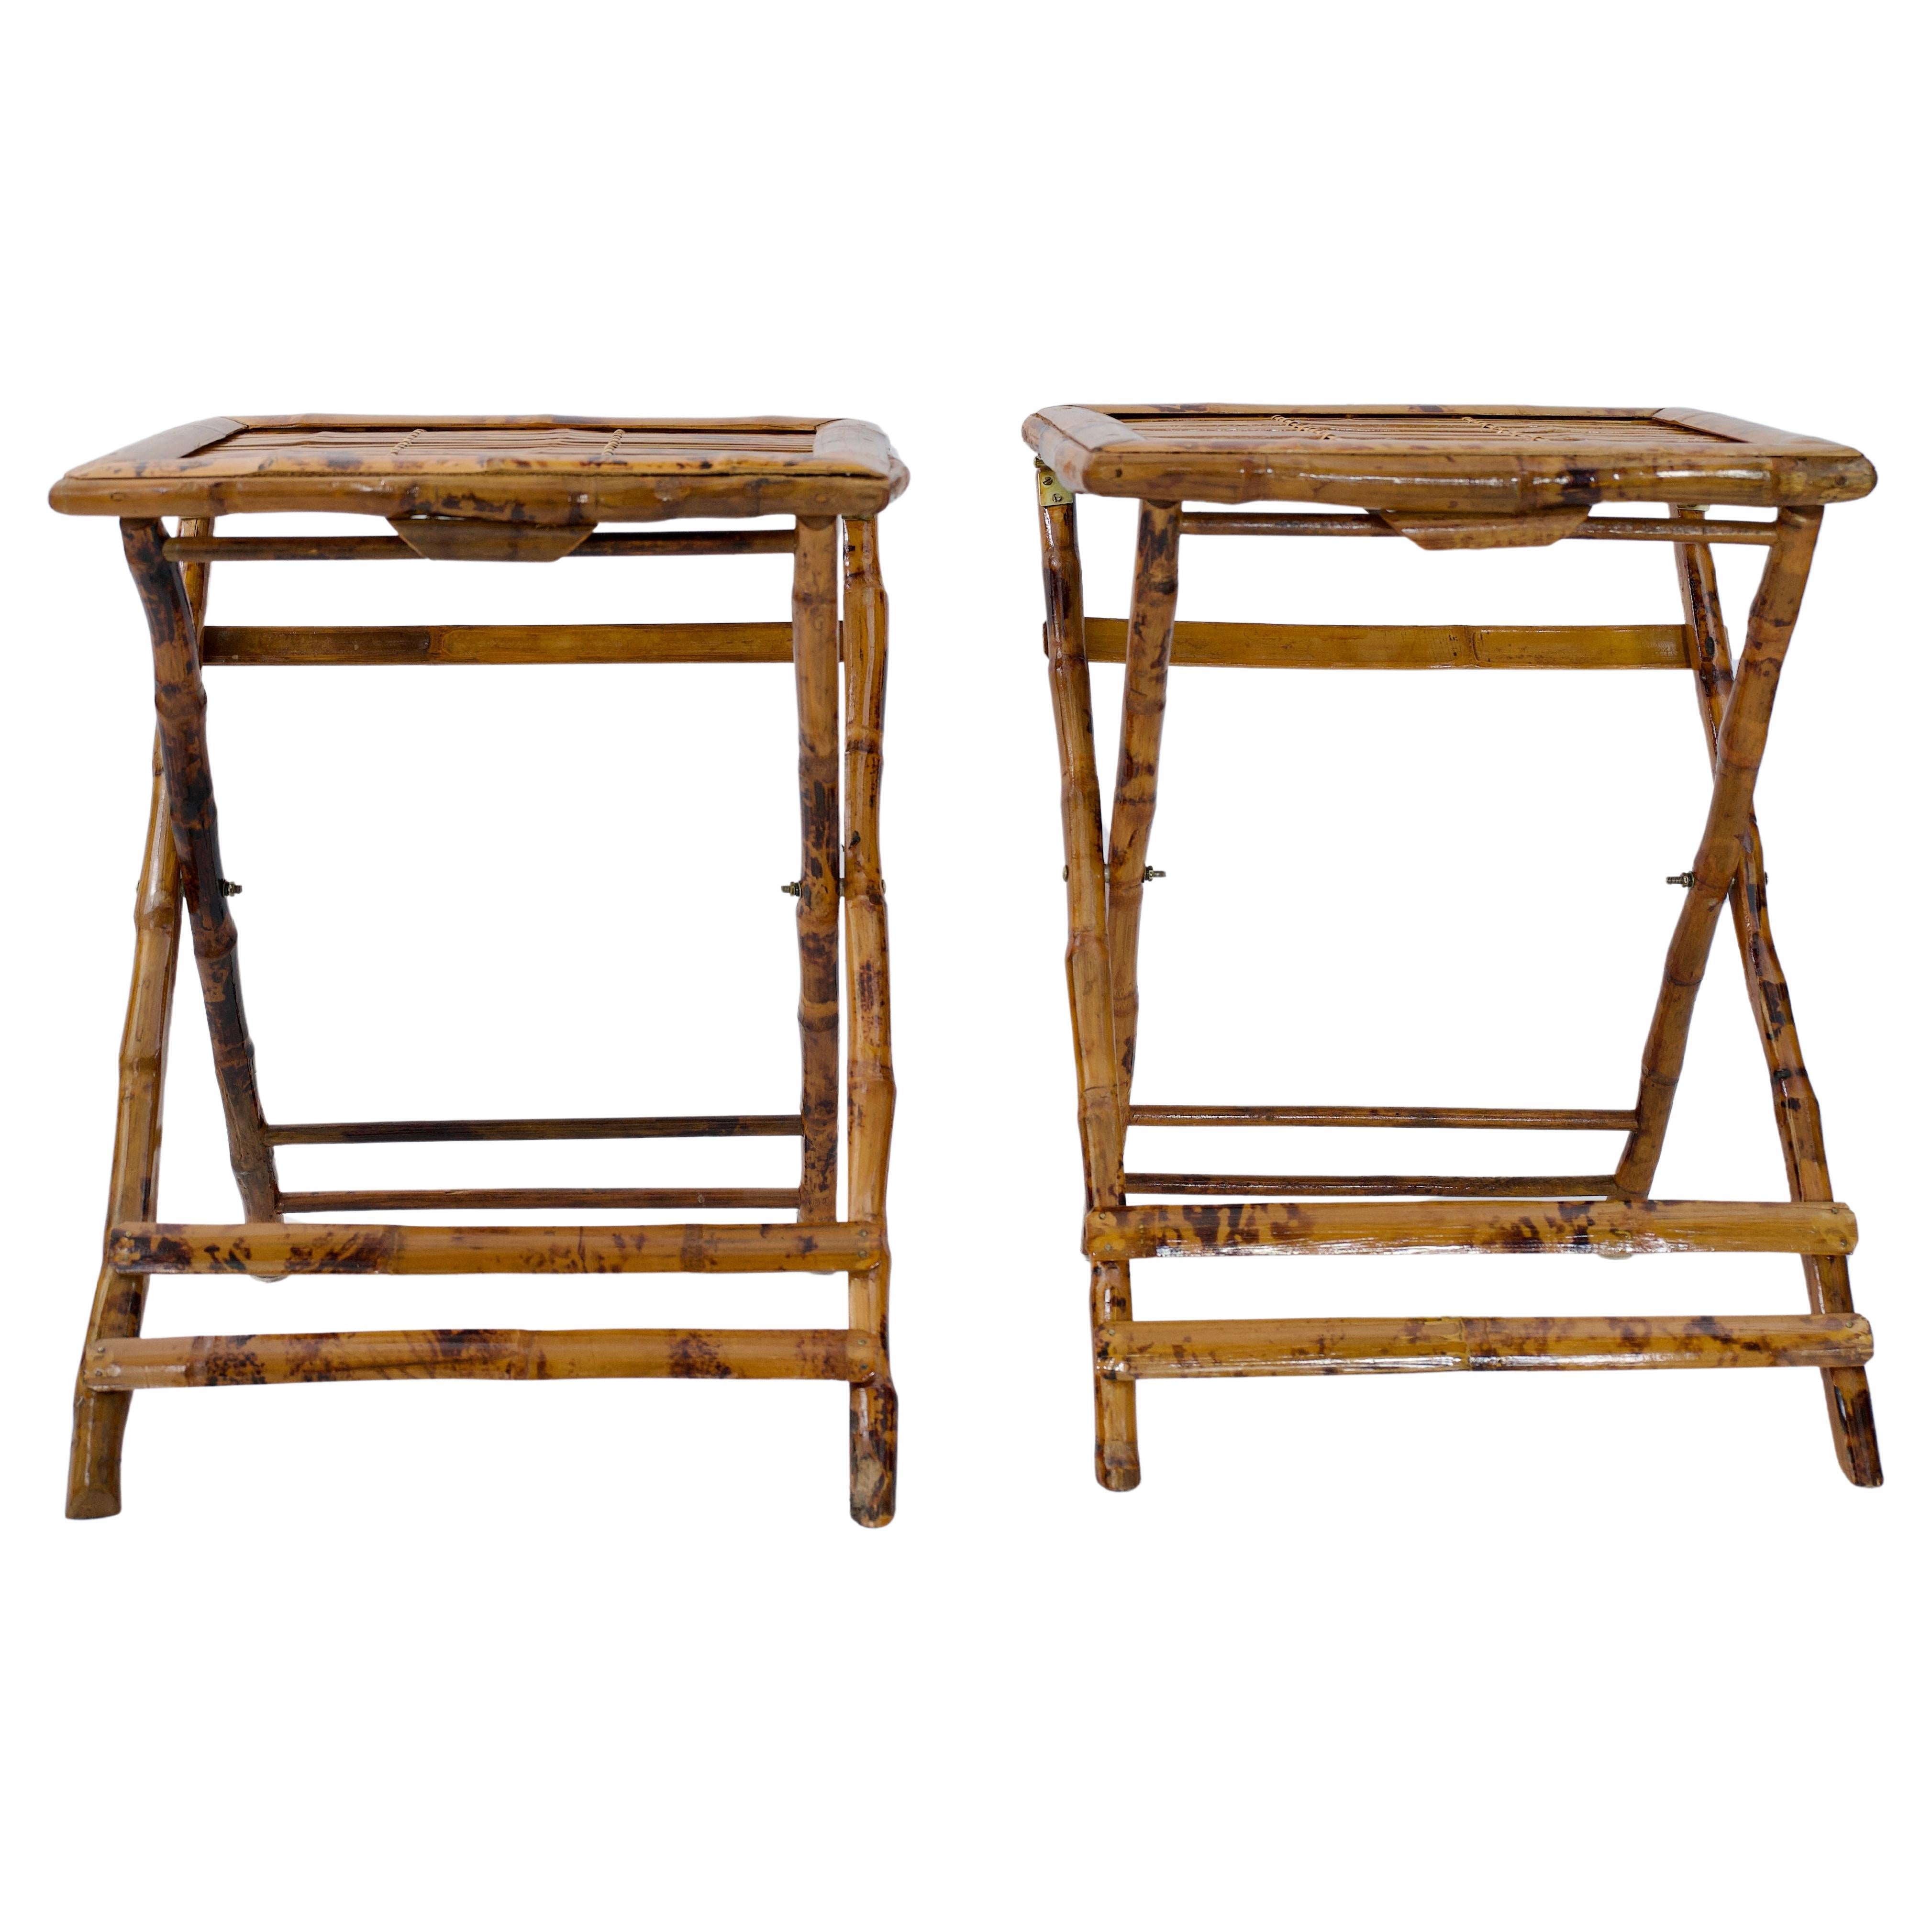 Pair of Bamboo Folding End Tables, Serving or Side Tables